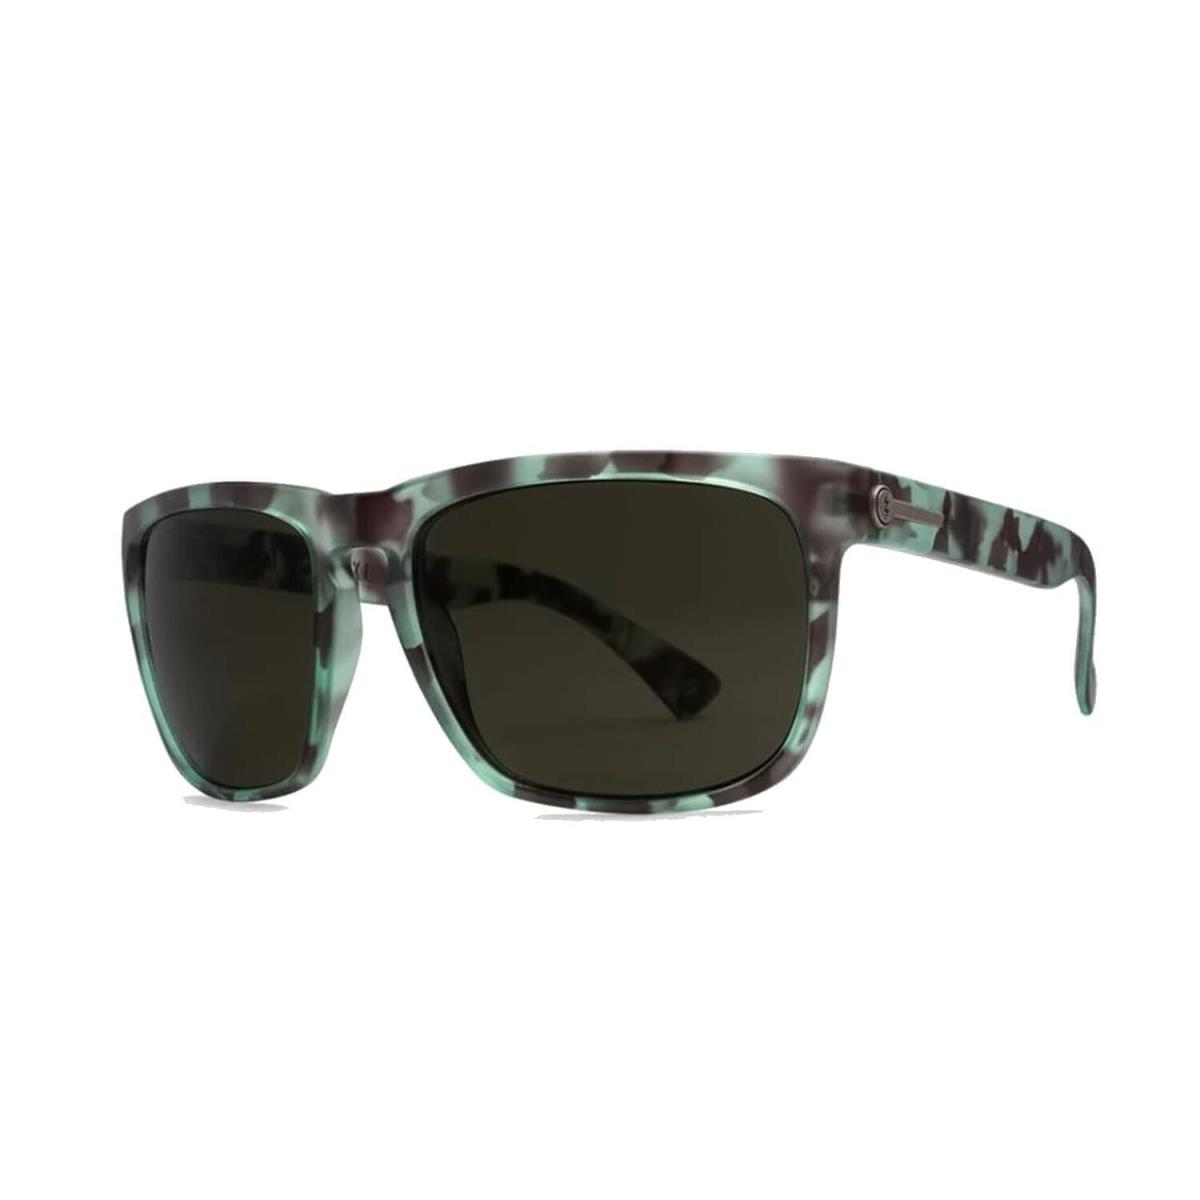 Electric Knoxville Sunglasses Gulf Tort with Grey Polarized Lens